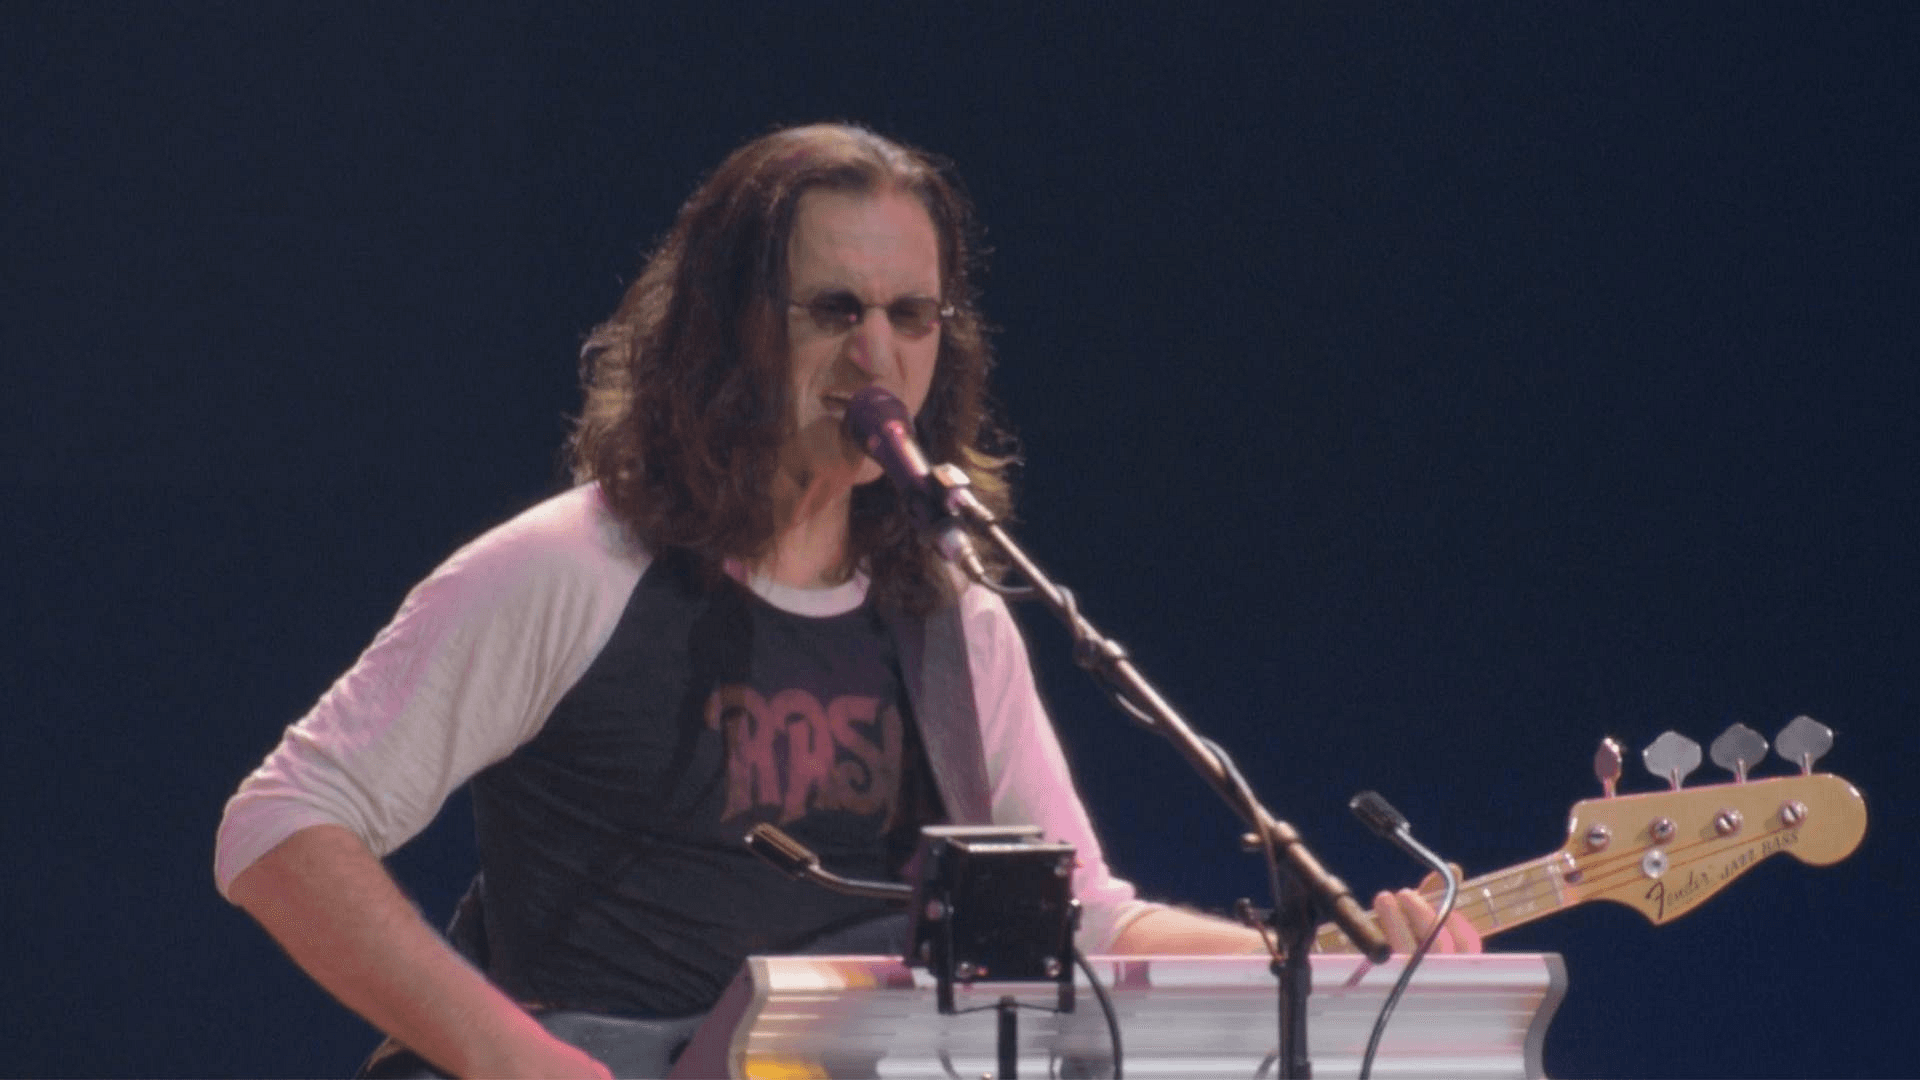 Rush - Time Machine: Live in Cleveland